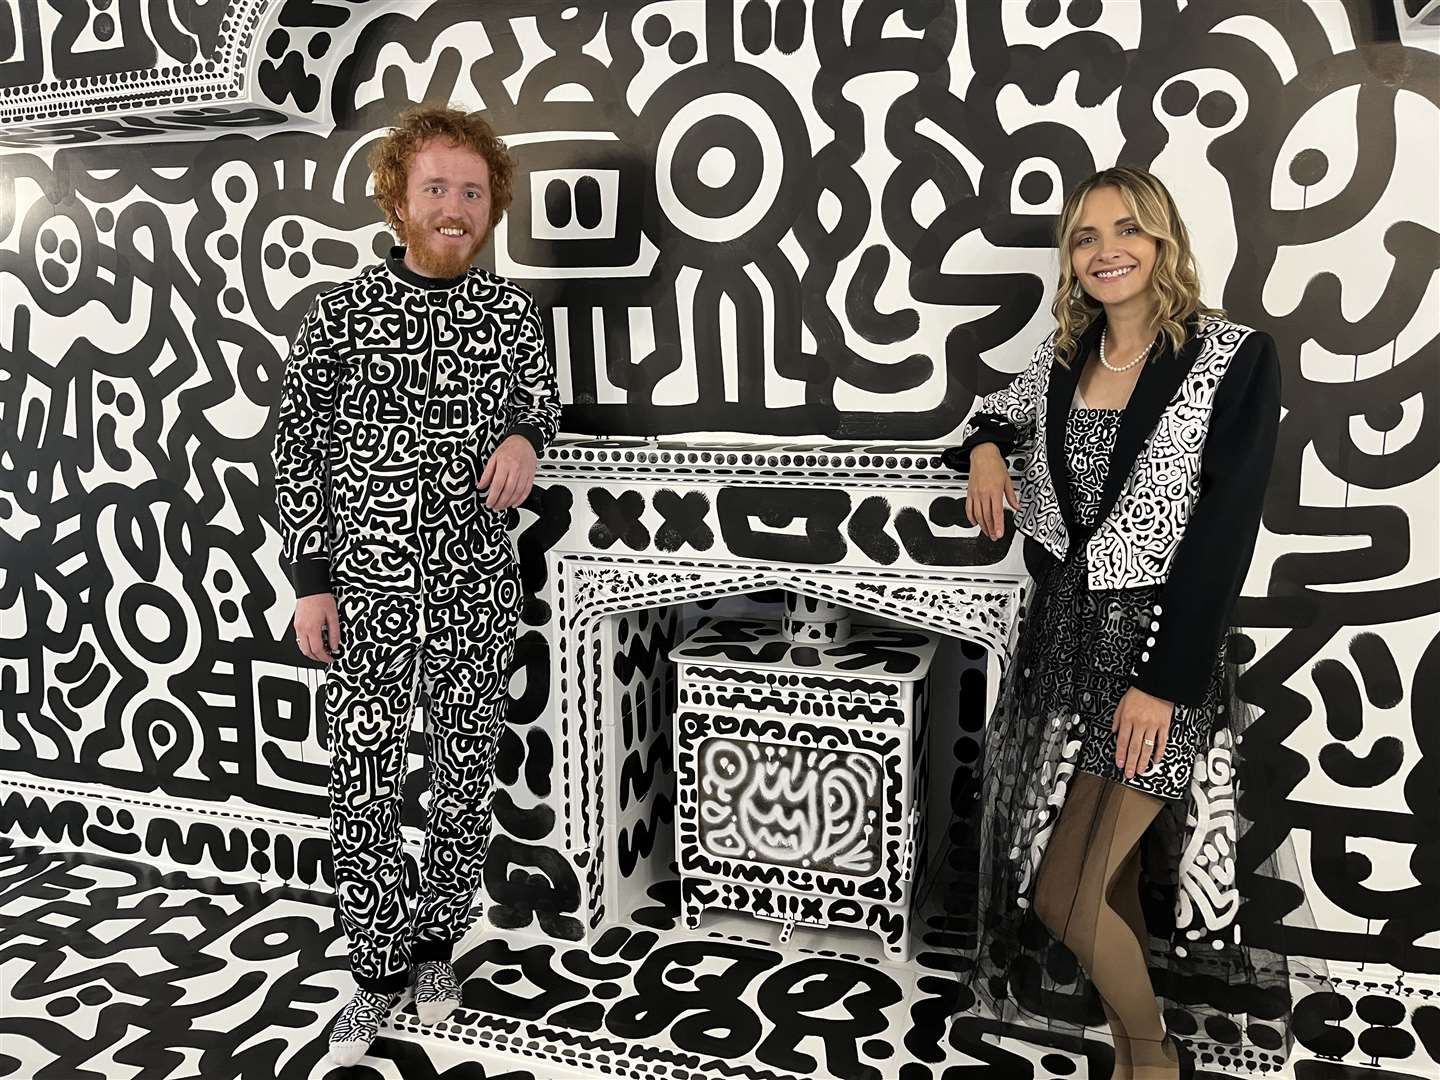 Sam Cox and his wife Alena Cox in his Mr Doodle house in Tenterden